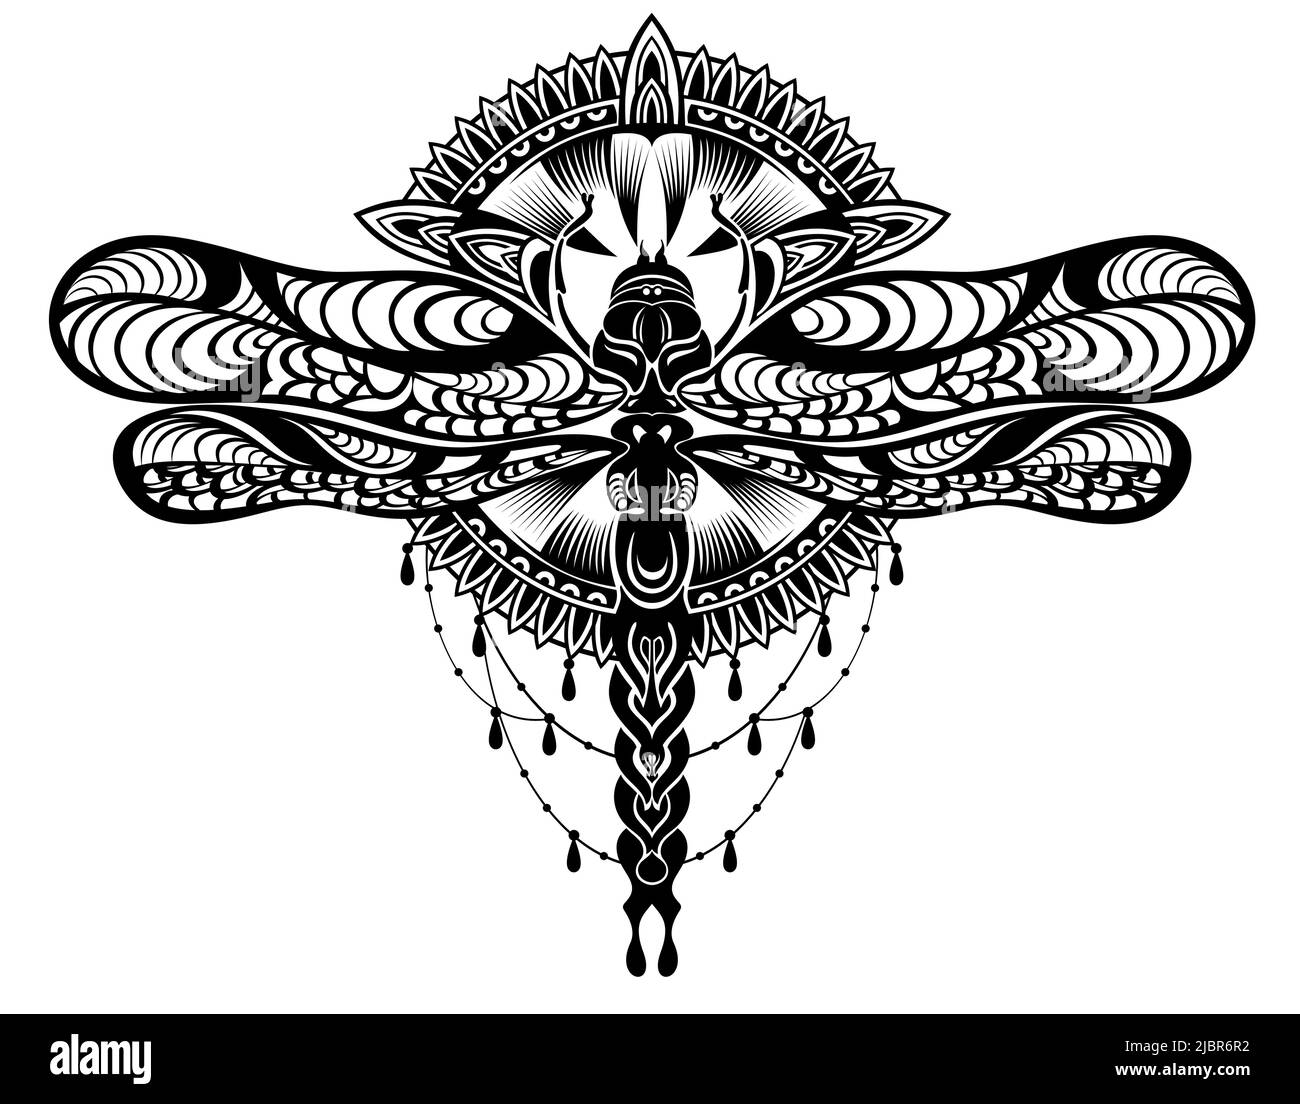 Engrave isolated dragonfly hand drawn graphic illustration Stock Vector